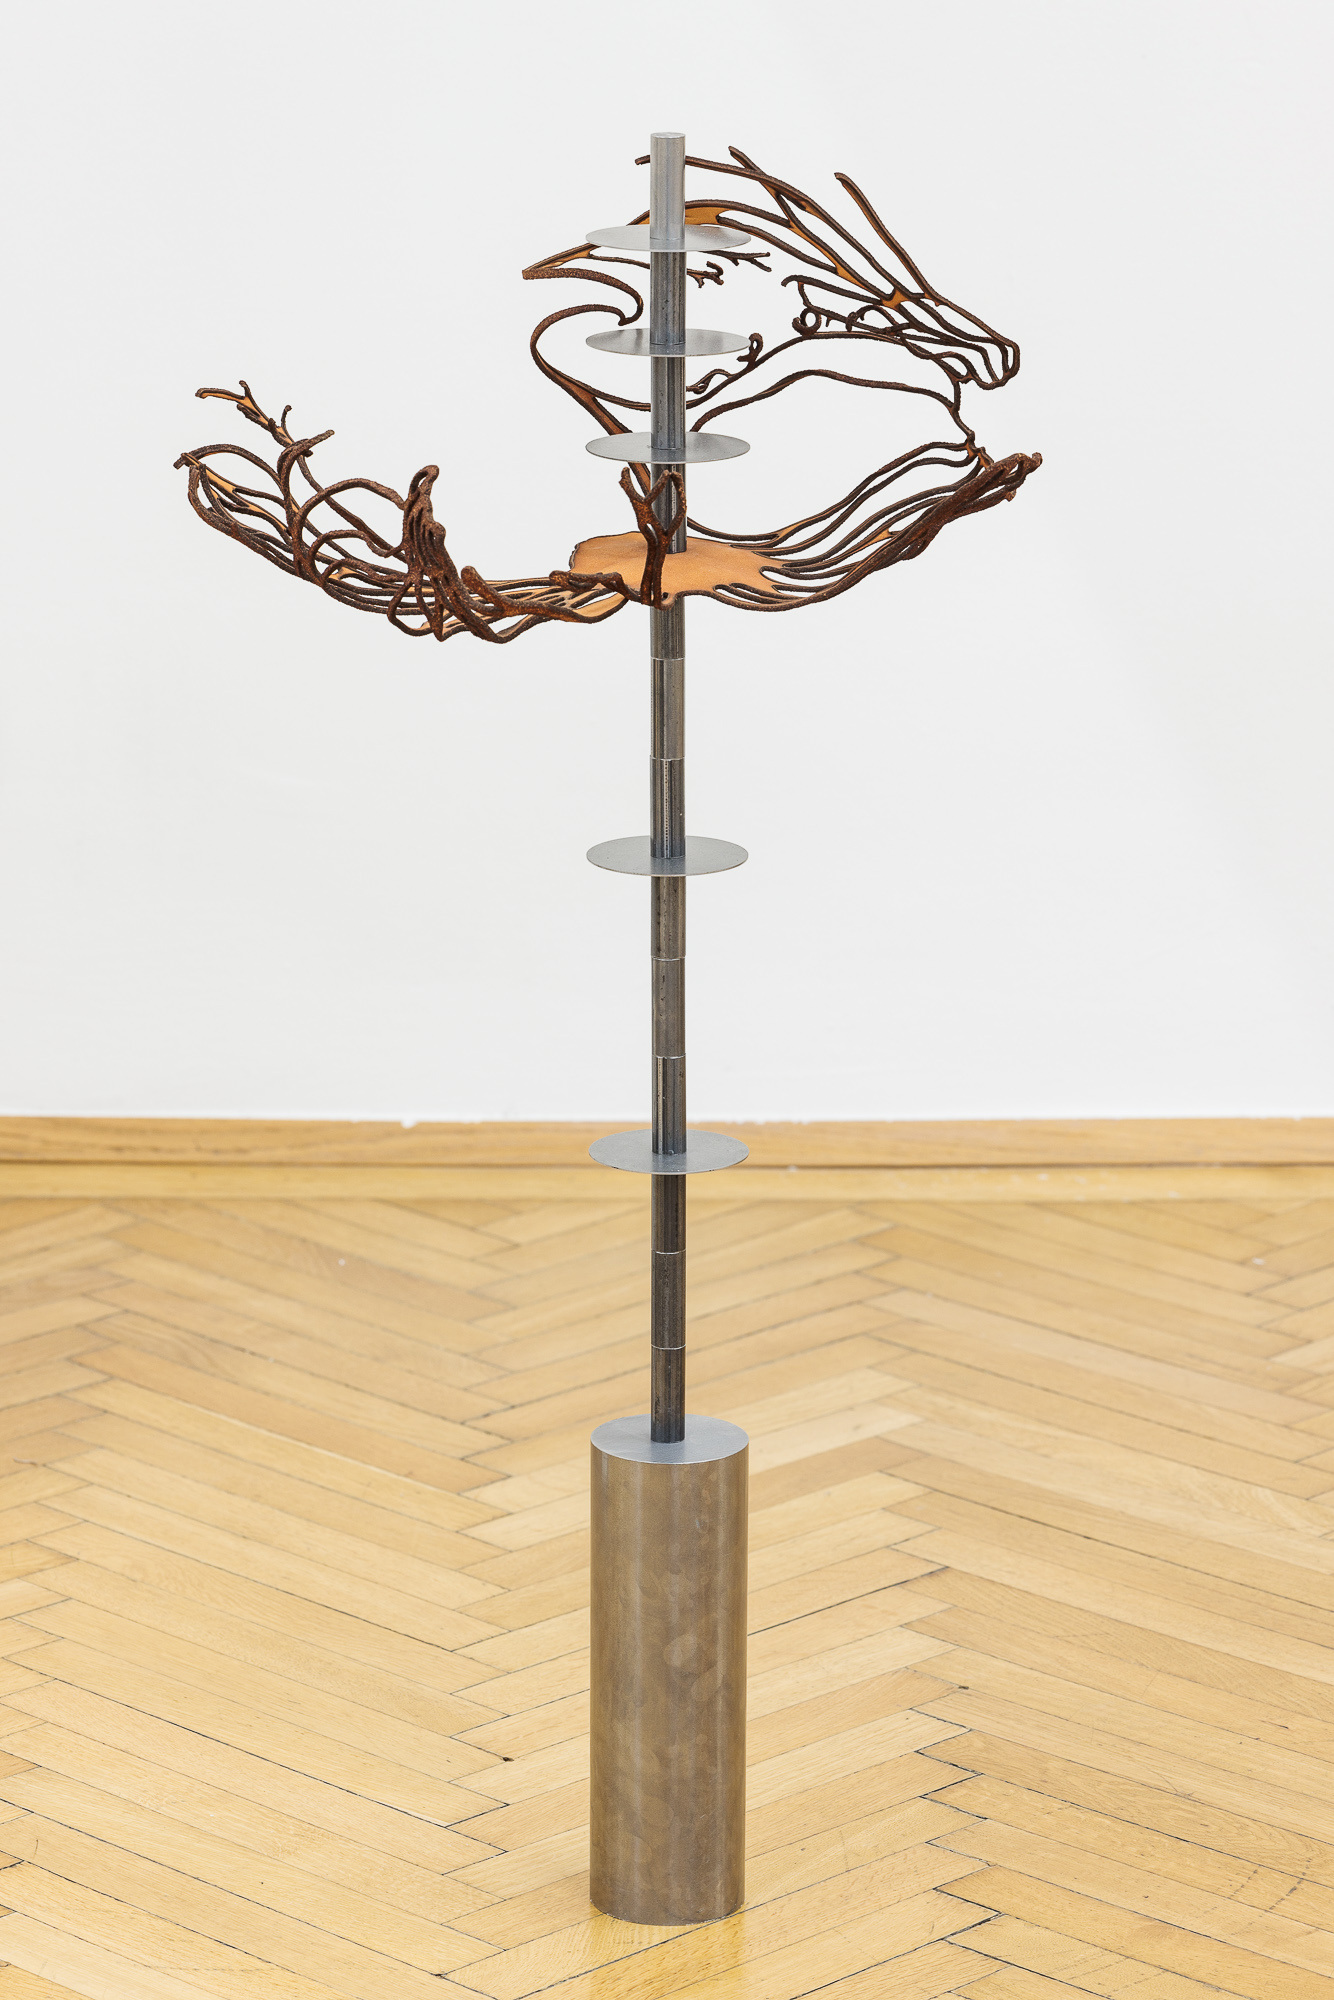 Bianca Phos: Deep thrills  (Love letter to a pioneer plant), 2021,  Steel, leather, 91 x 40 x 30 cm